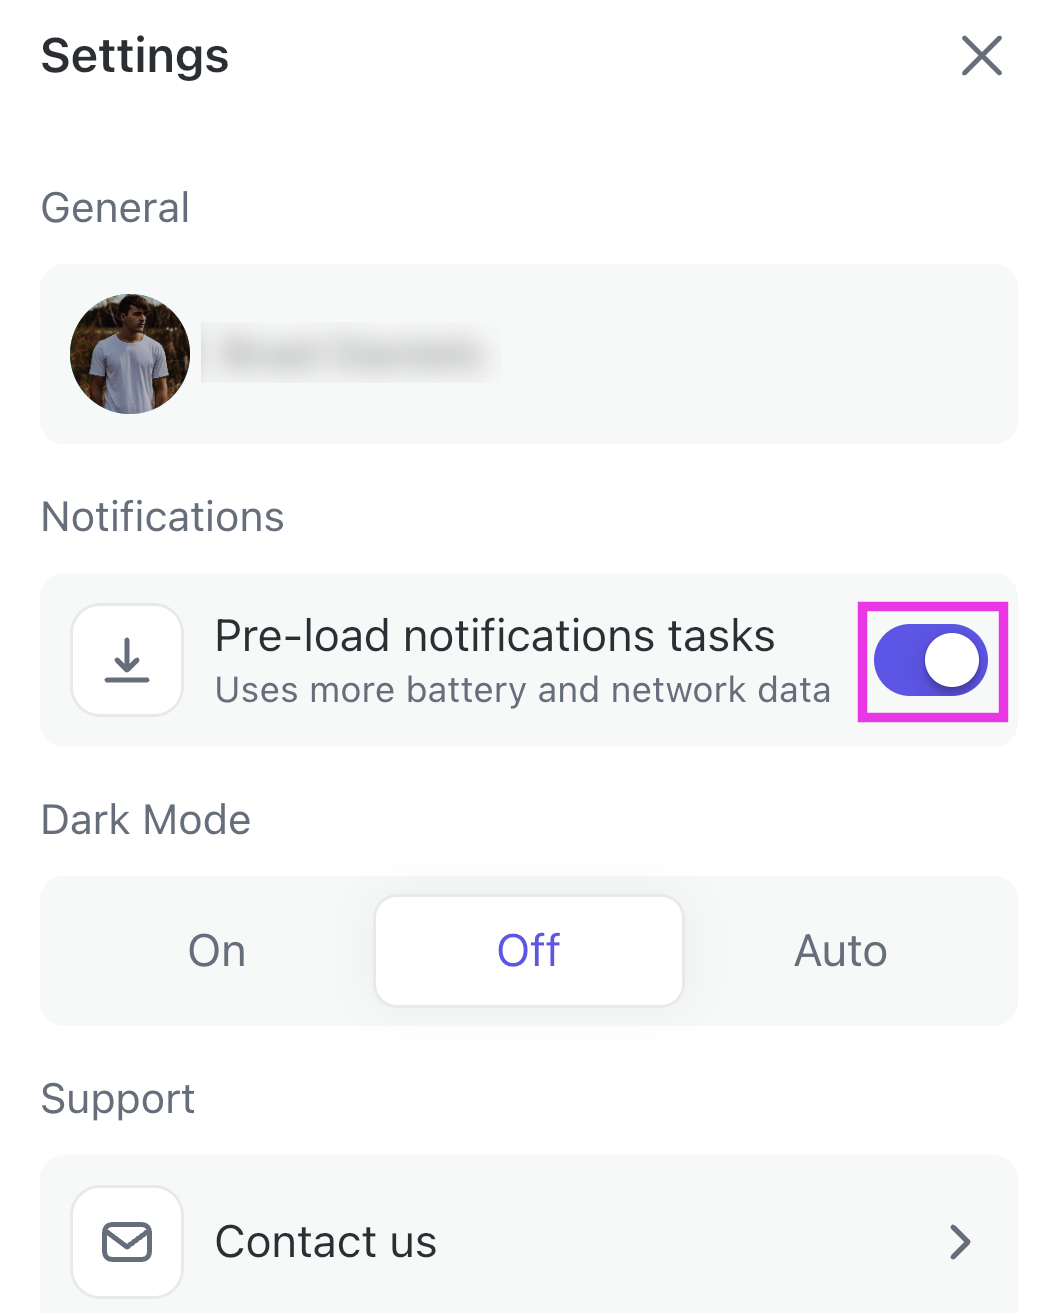 Screenshot of the 'Pre-load notifications tasks' option in mobile settings.